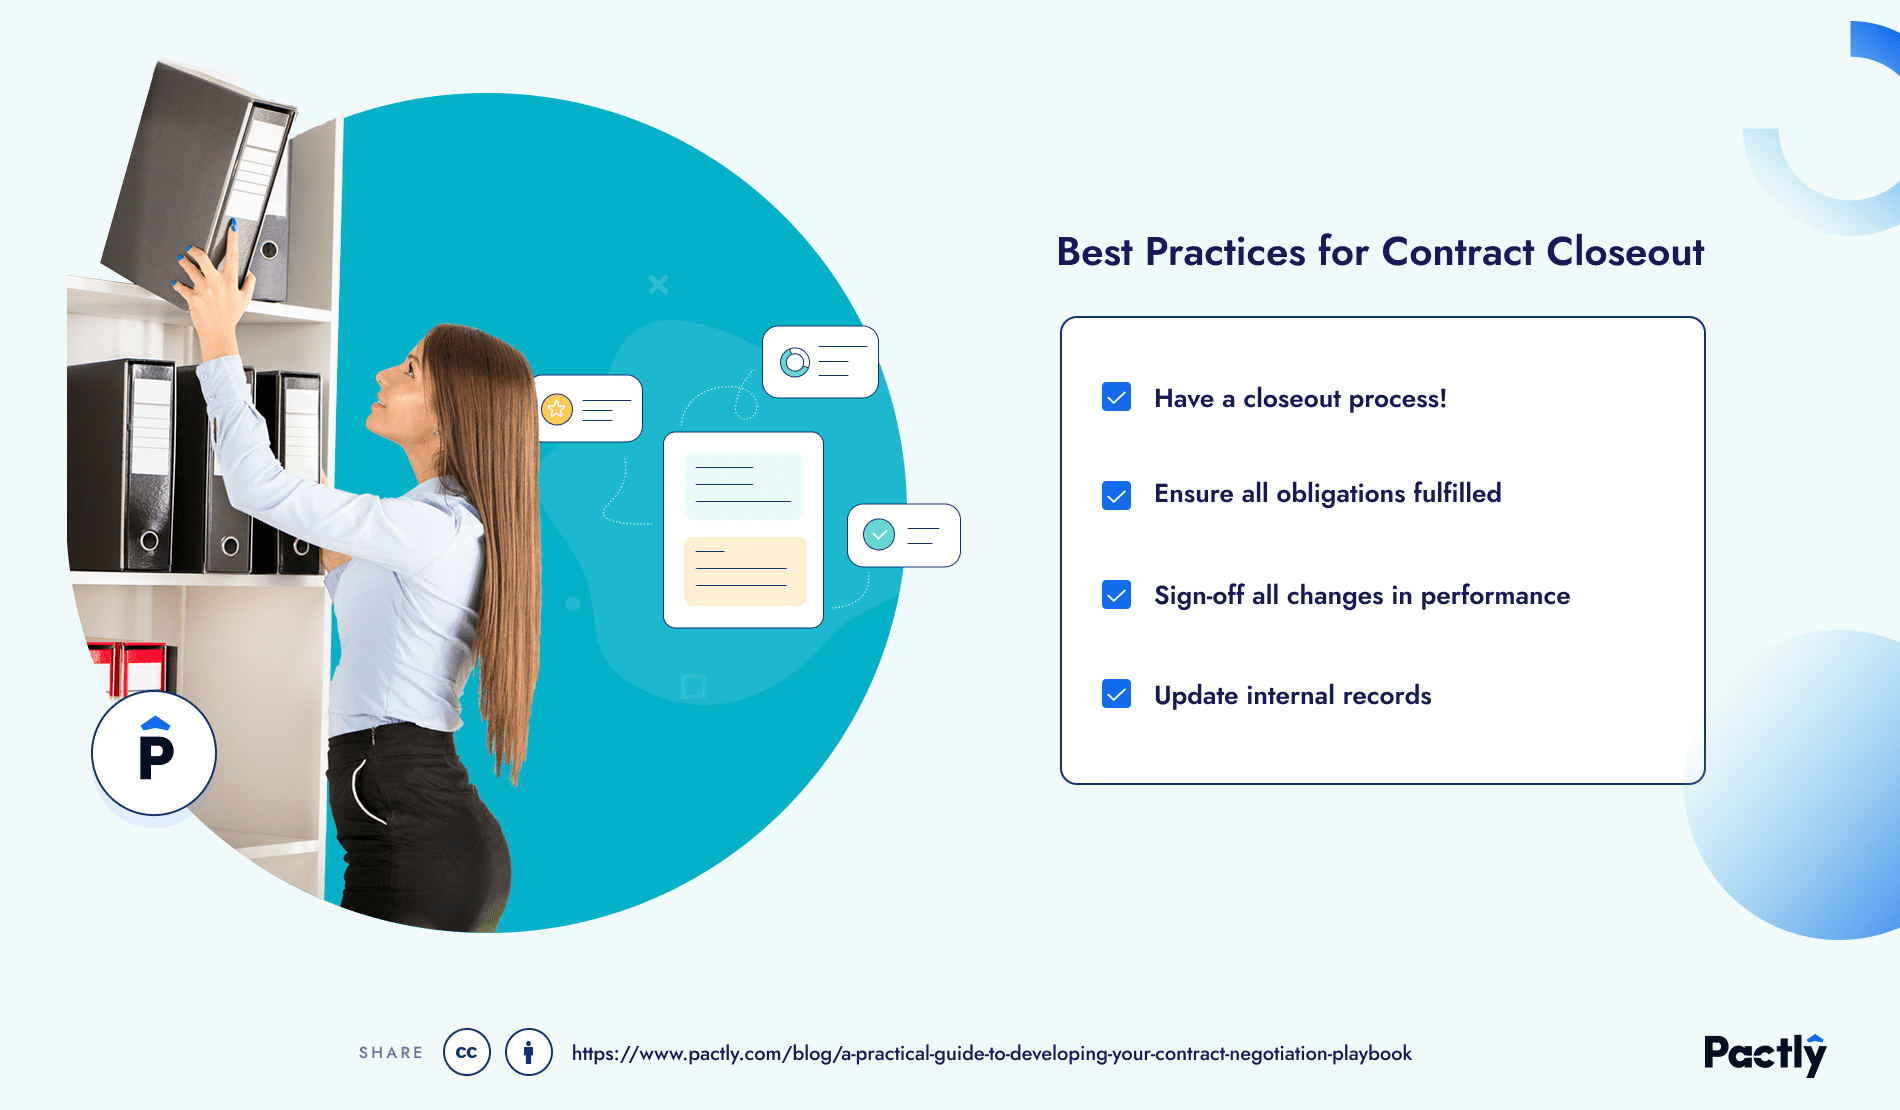 Best practices for contract closeout